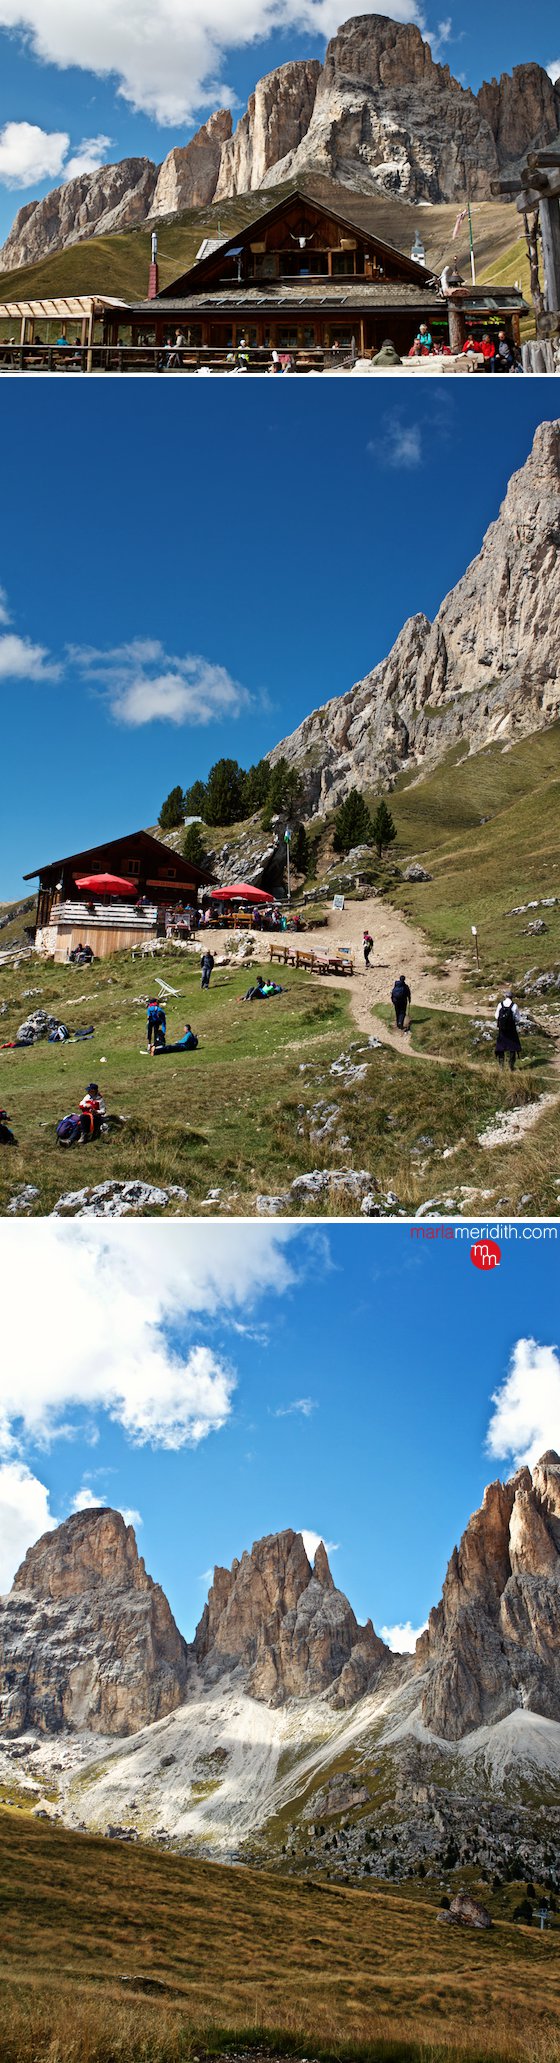 Hiking in the Dolomites #Italy | MarlaMeridith.com ( @marlameridith ) #travel #hiking